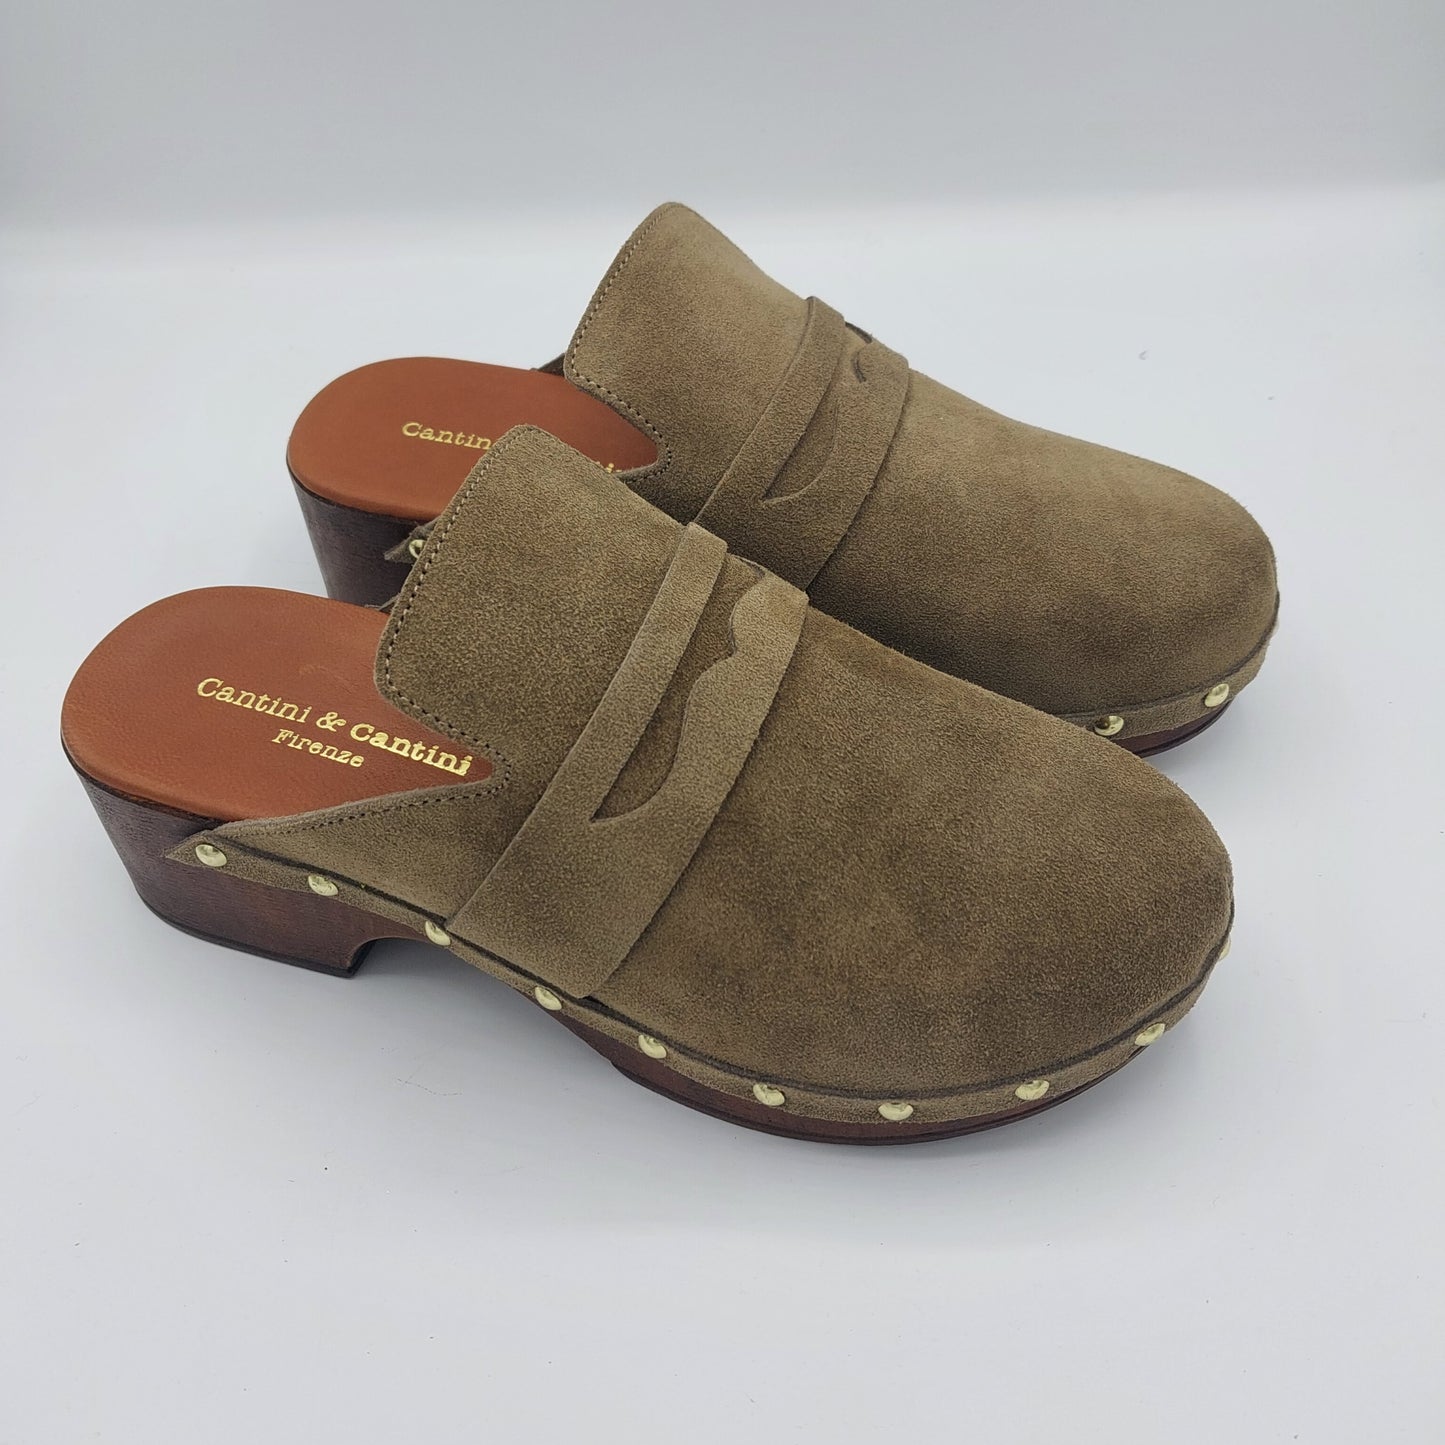 Cantini &amp; Cantini clog in sage green suede